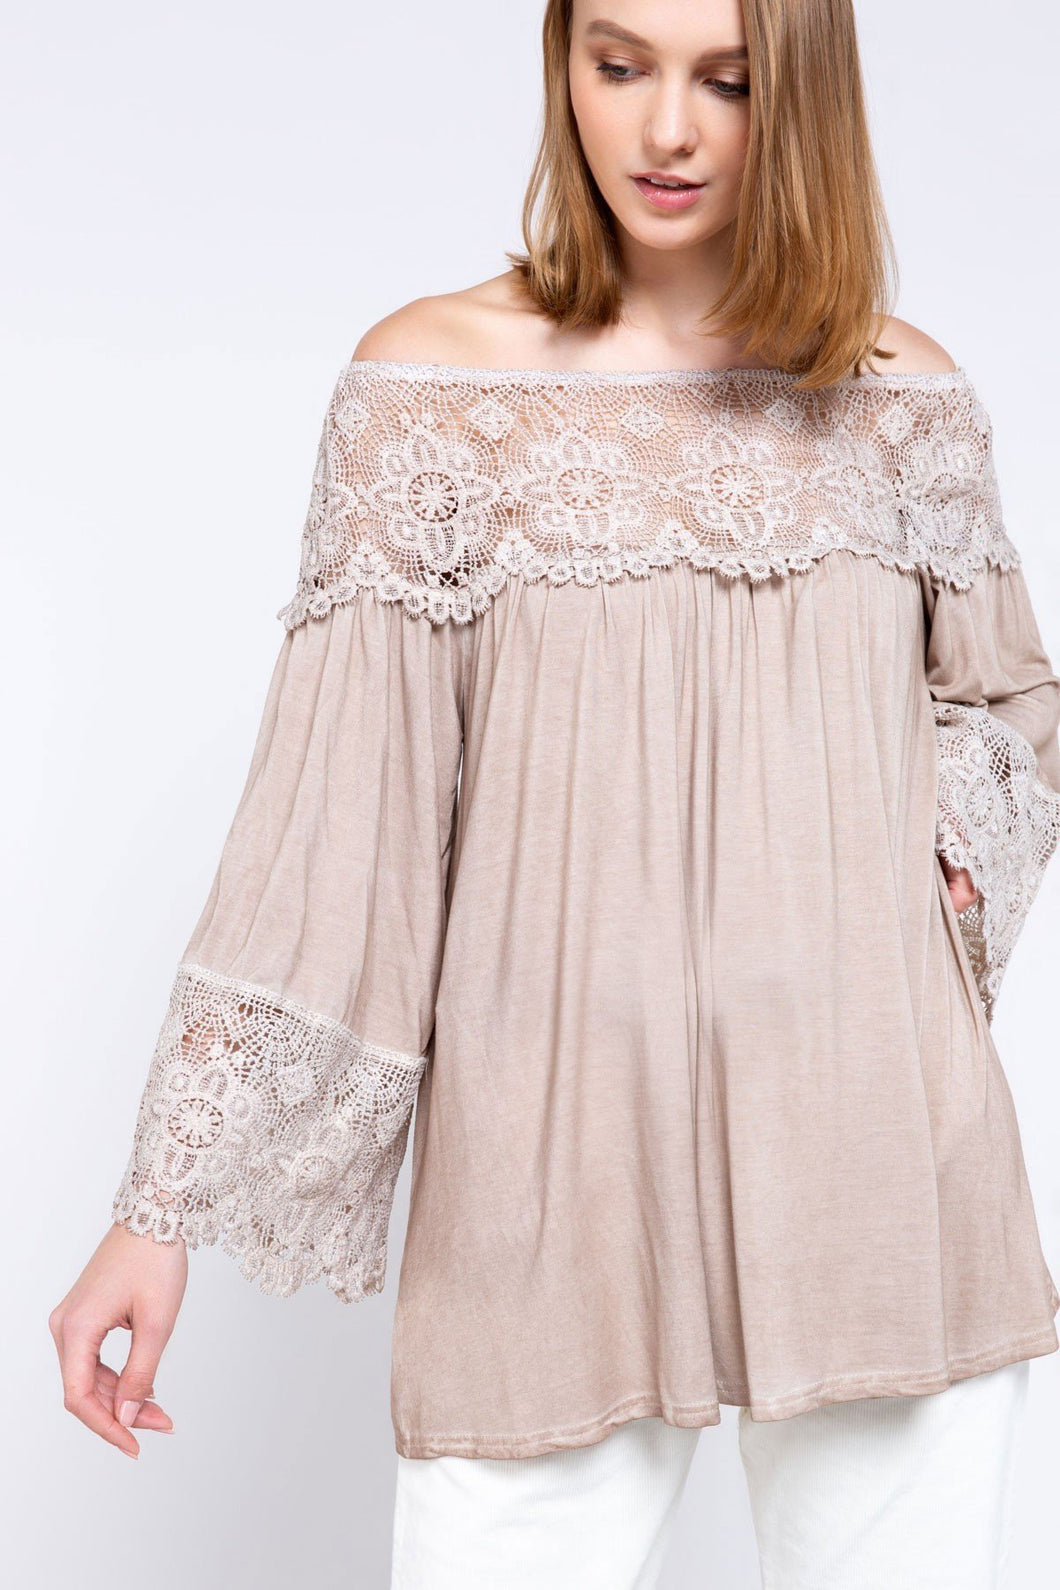 The Road Less Traveled Tunic